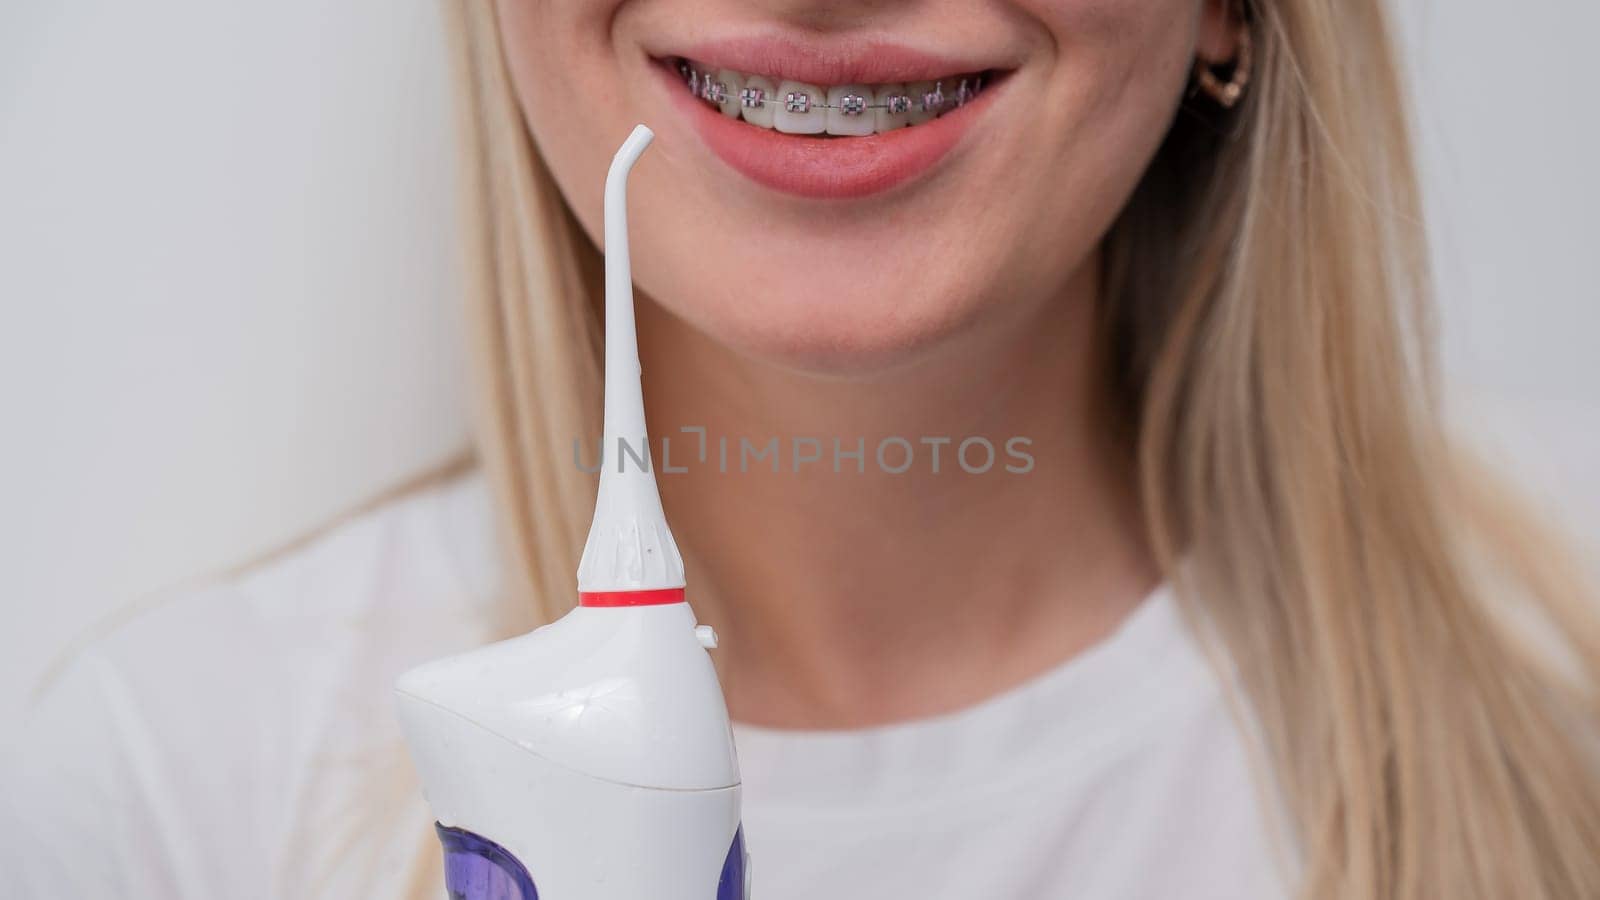 Cropped portrait of a caucasian woman with braces on her teeth holding an irrigator. by mrwed54